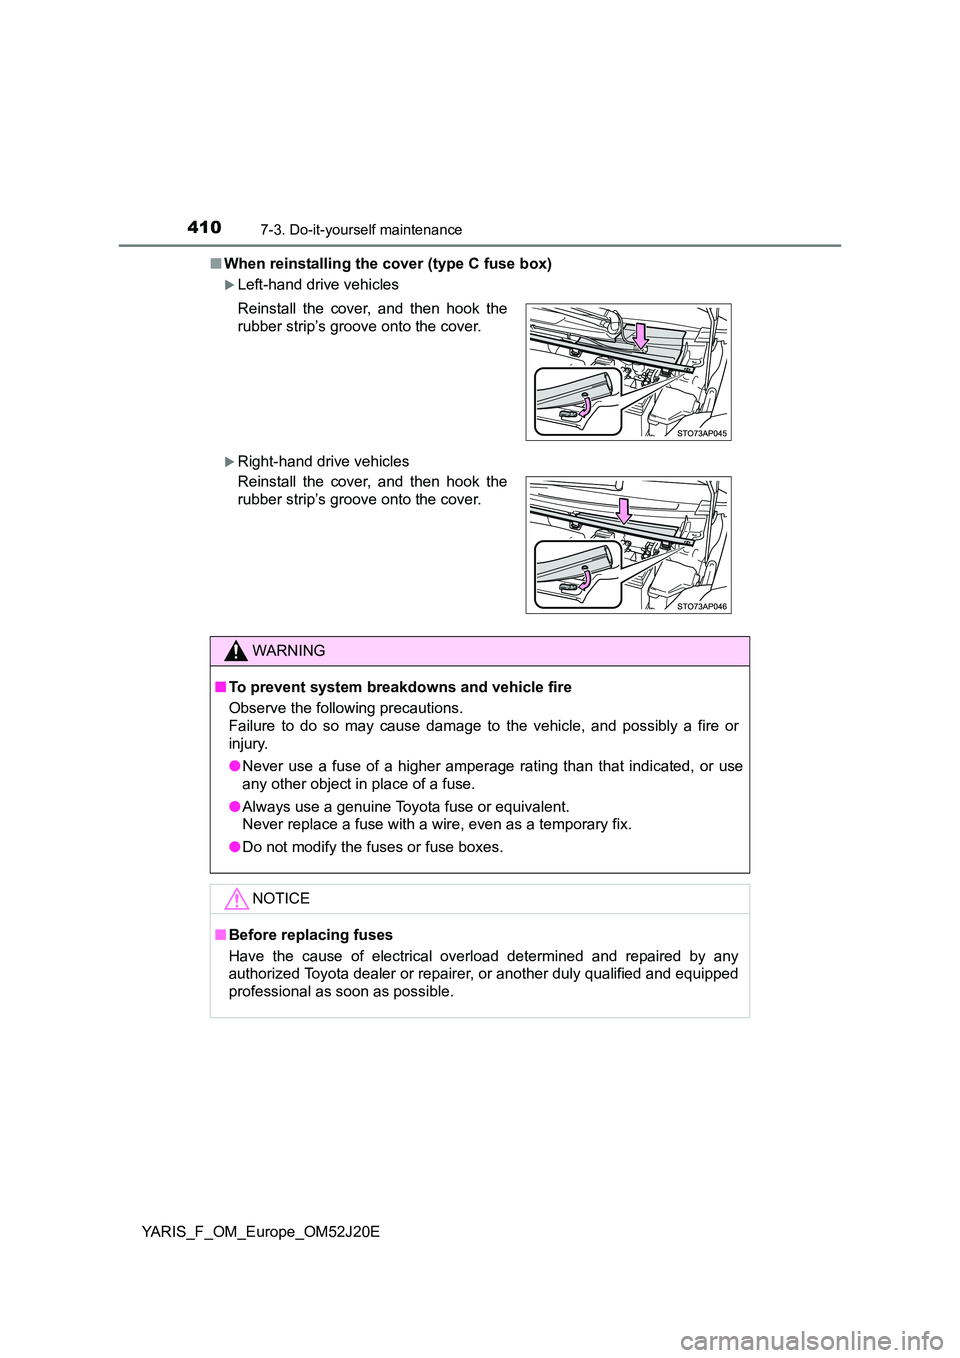 TOYOTA YARIS 2017  Owners Manual 4107-3. Do-it-yourself maintenance
YARIS_F_OM_Europe_OM52J20E 
■ When reinstalling the cover (type C fuse box)
Left-hand drive vehicles
Right-hand drive vehicles 
Reinstall the cover, and then